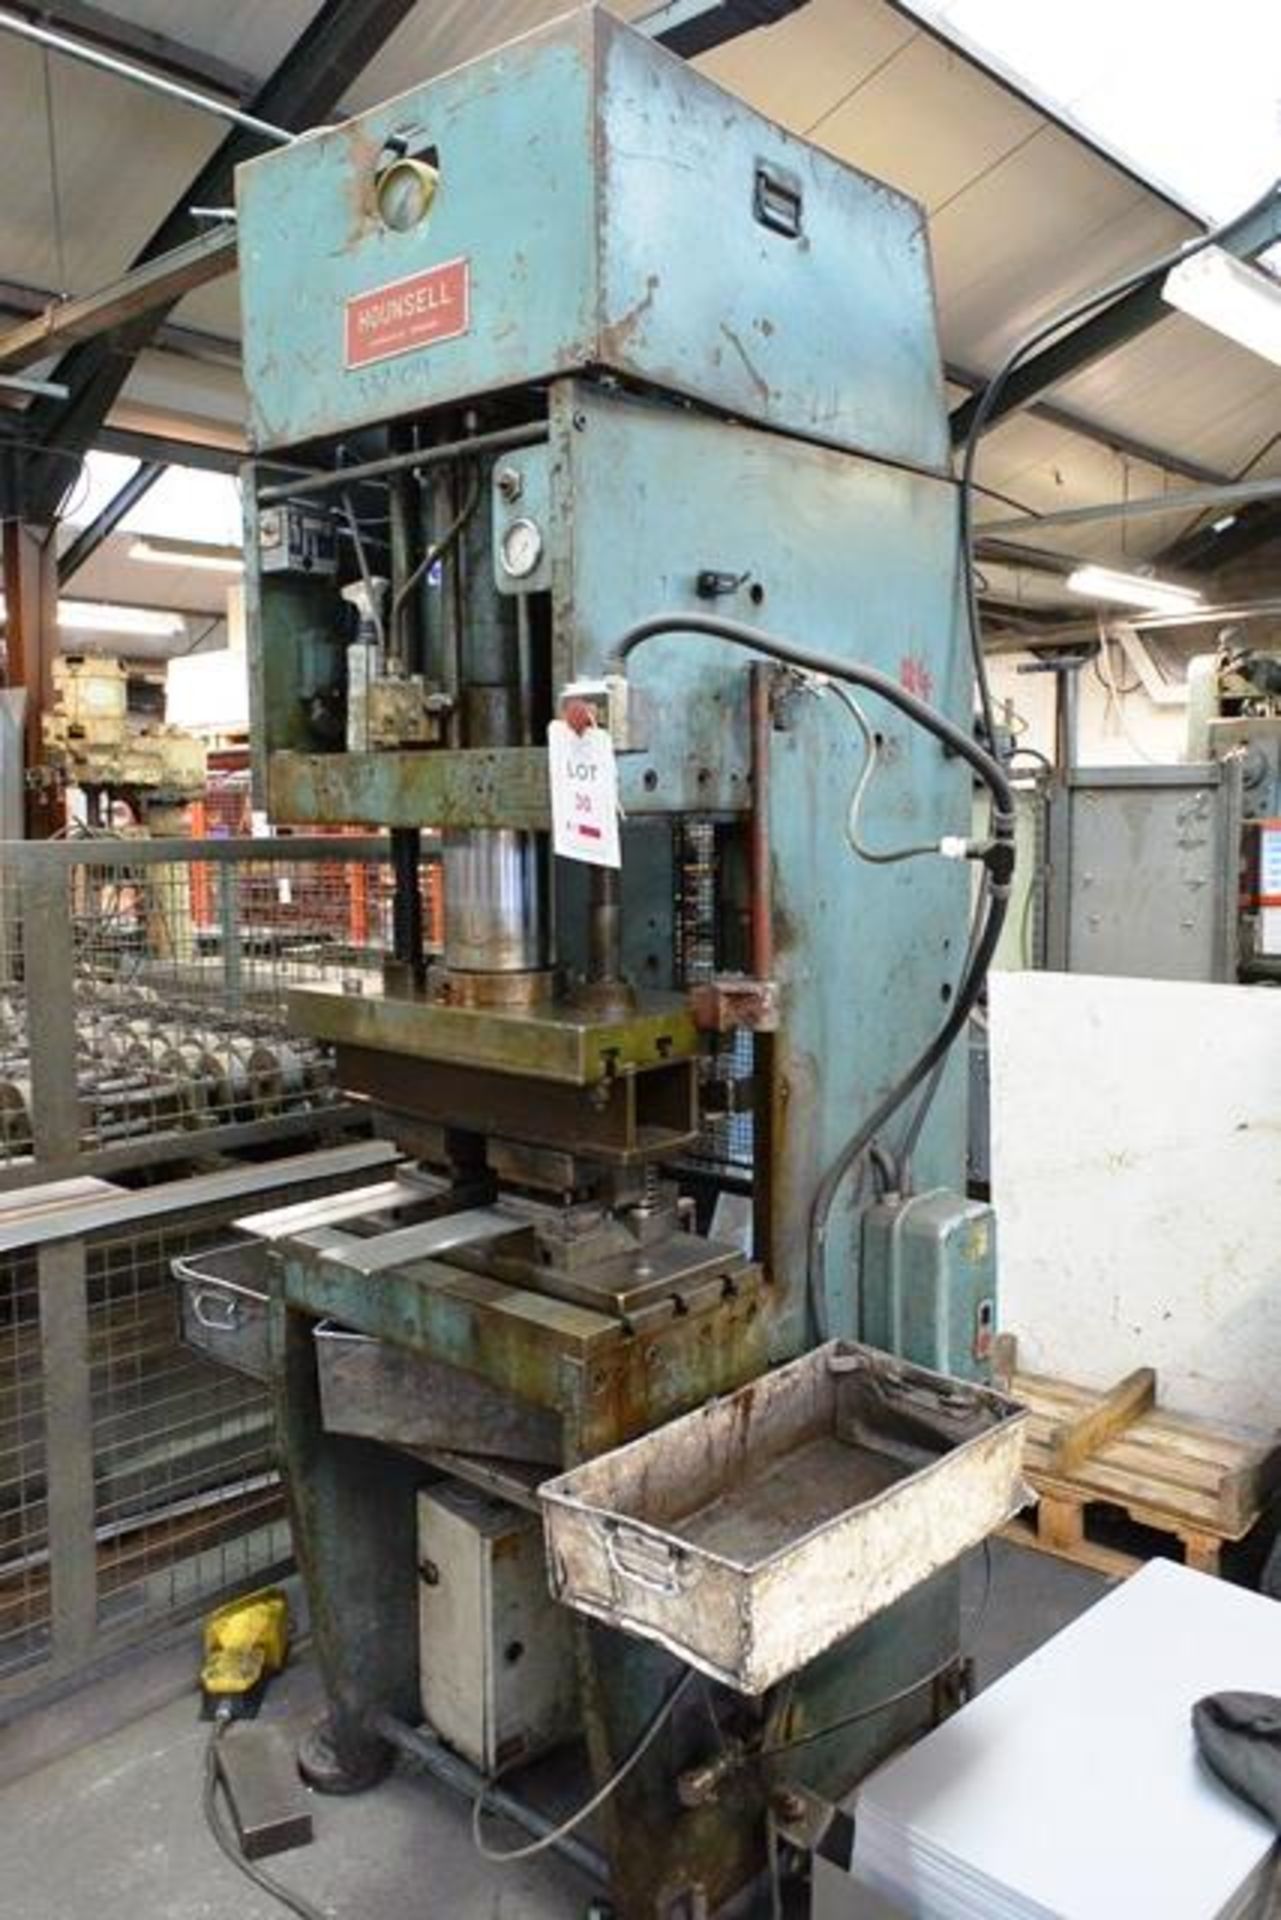 Hounsell hydraulic single ram vertical press, approx 40 ton capacity, 20" x 14" table size (please